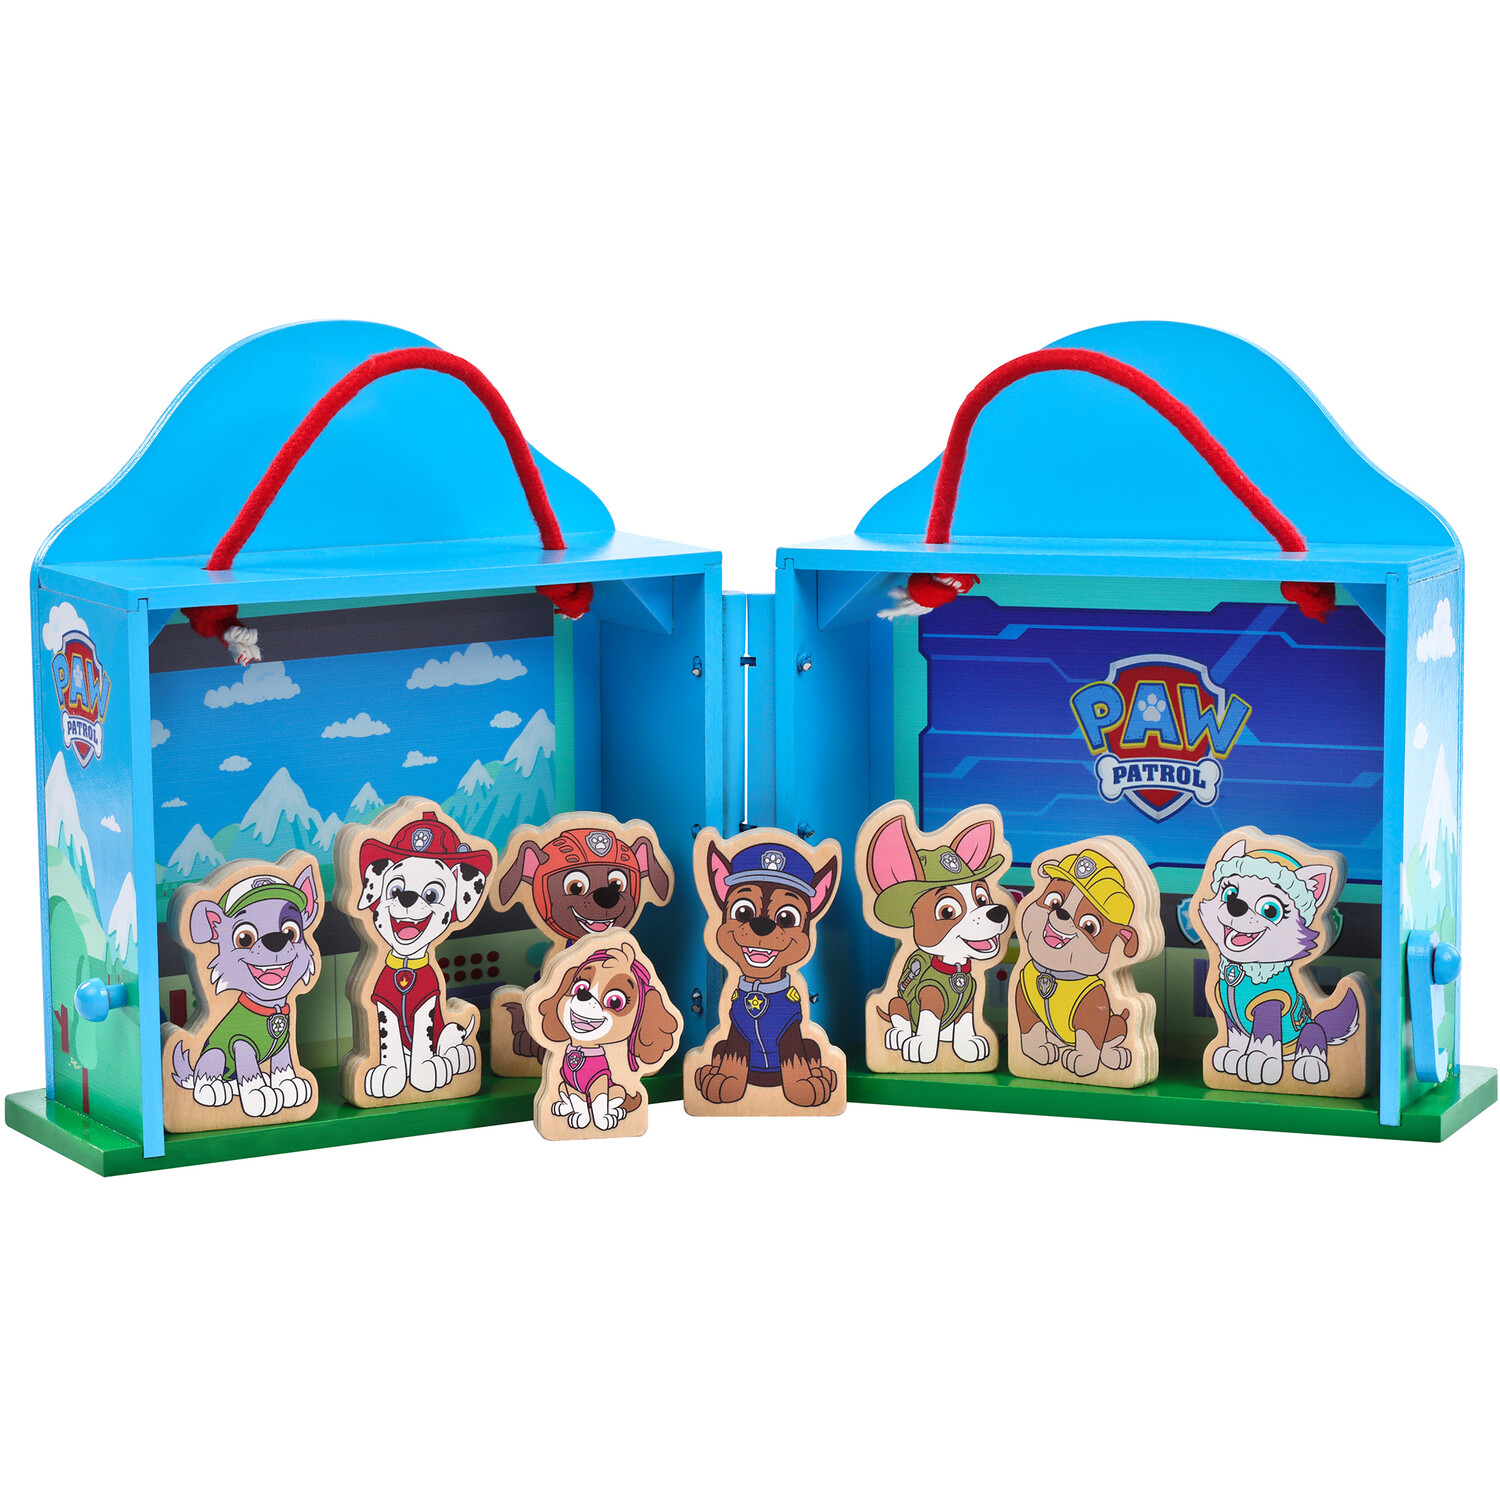 Paw Patrol Blue Carry Along House Playset Image